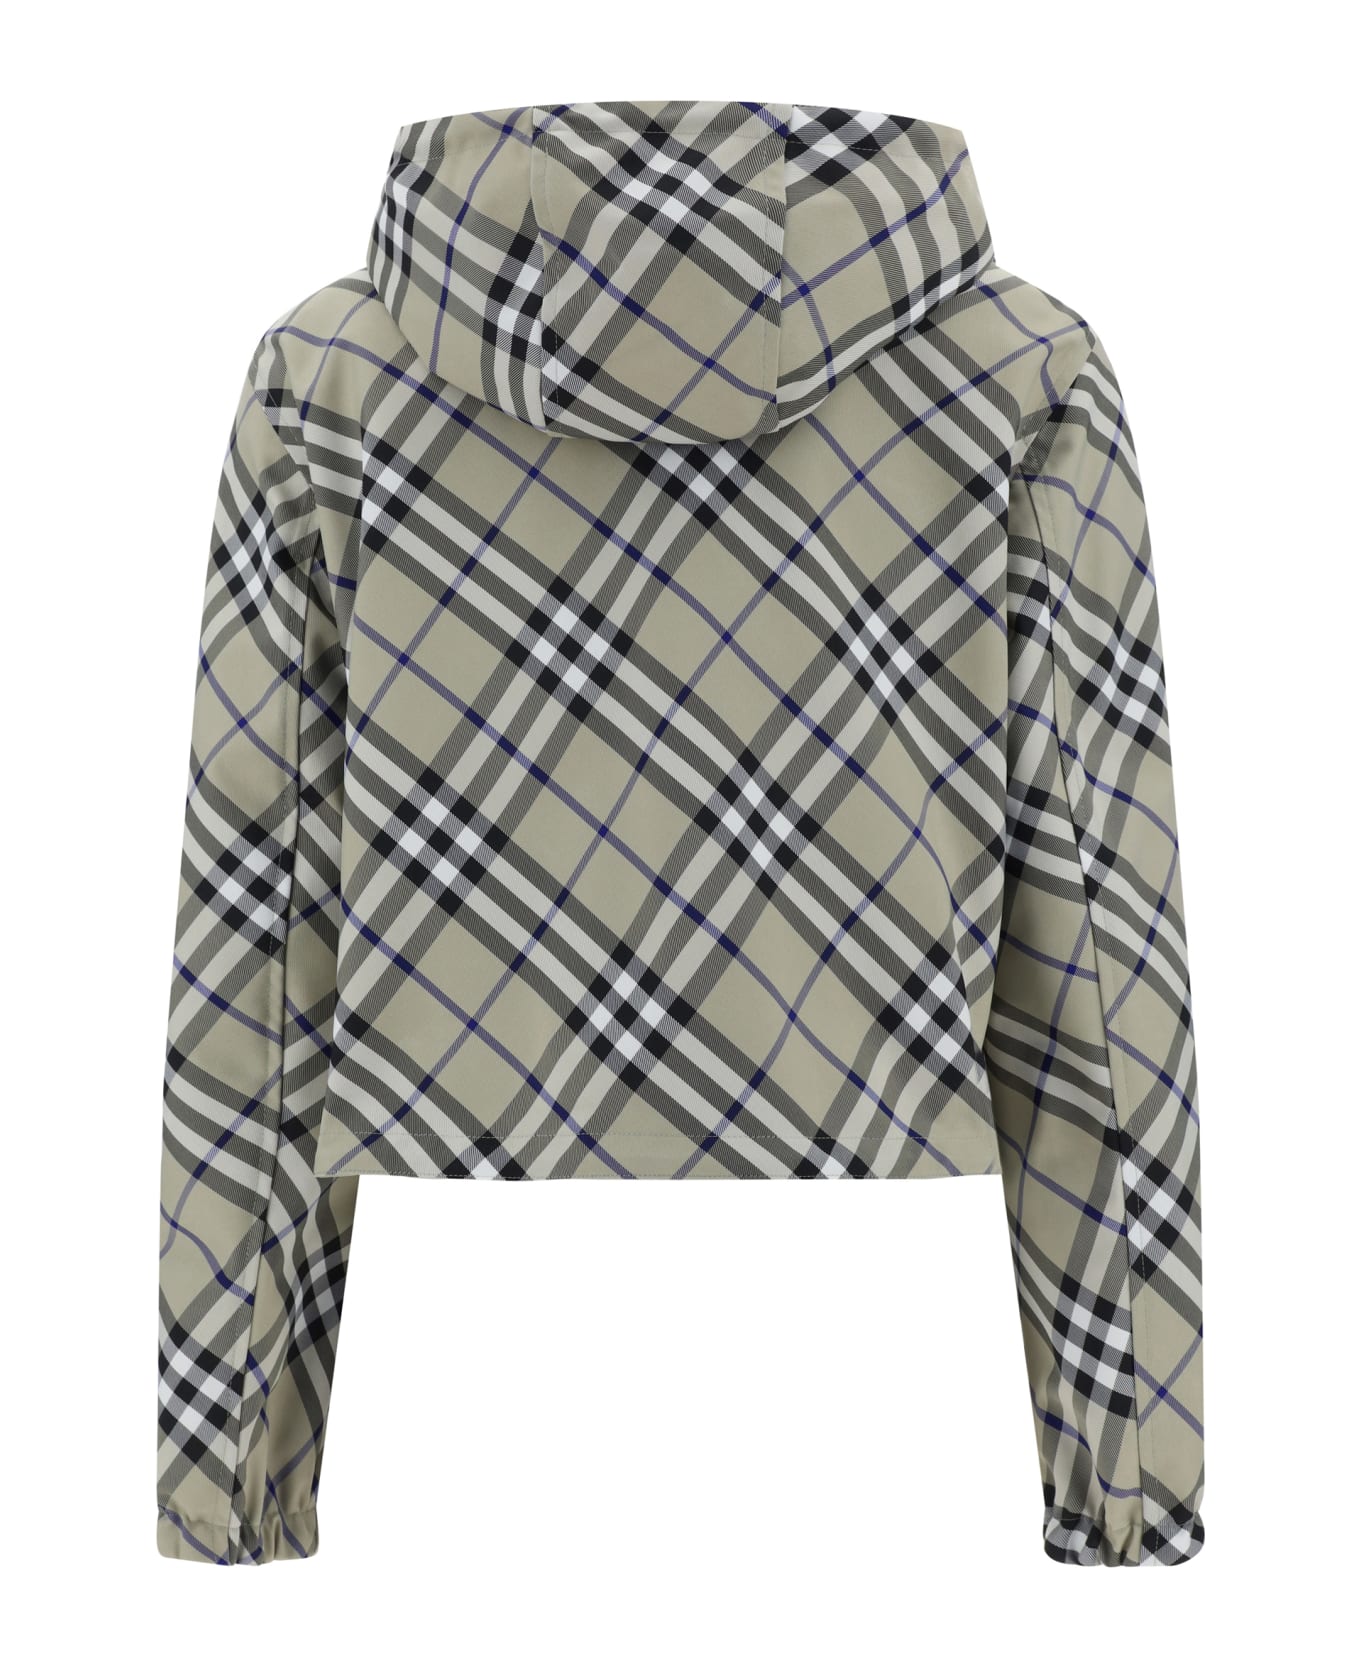 Burberry Reversible Cropped Checked Hooded Jacket - Lichen Ip Check ジャケット